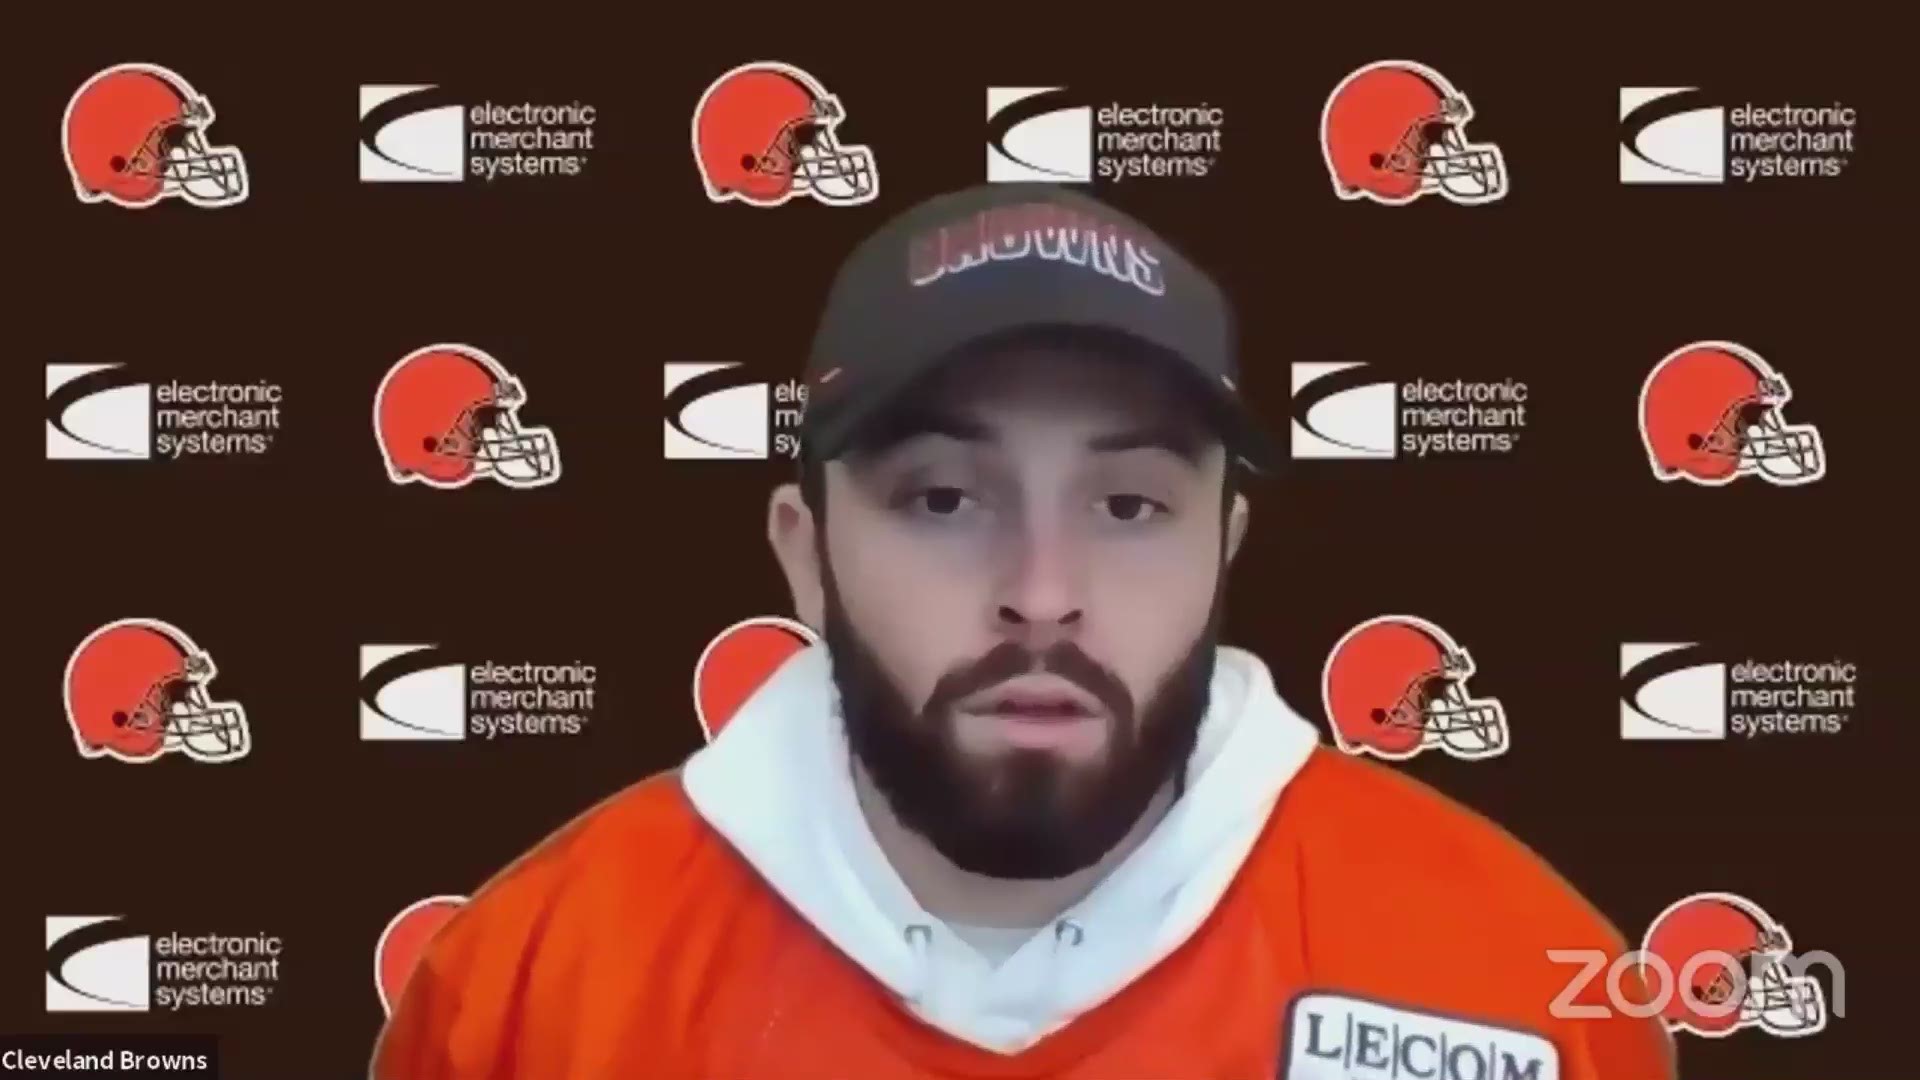 Cleveland Browns quarterback Baker Mayfield said he's confident he'll play vs. the Pittsburgh Steelers on Sunday despite suffering a ribs injury vs. Indianapolis.